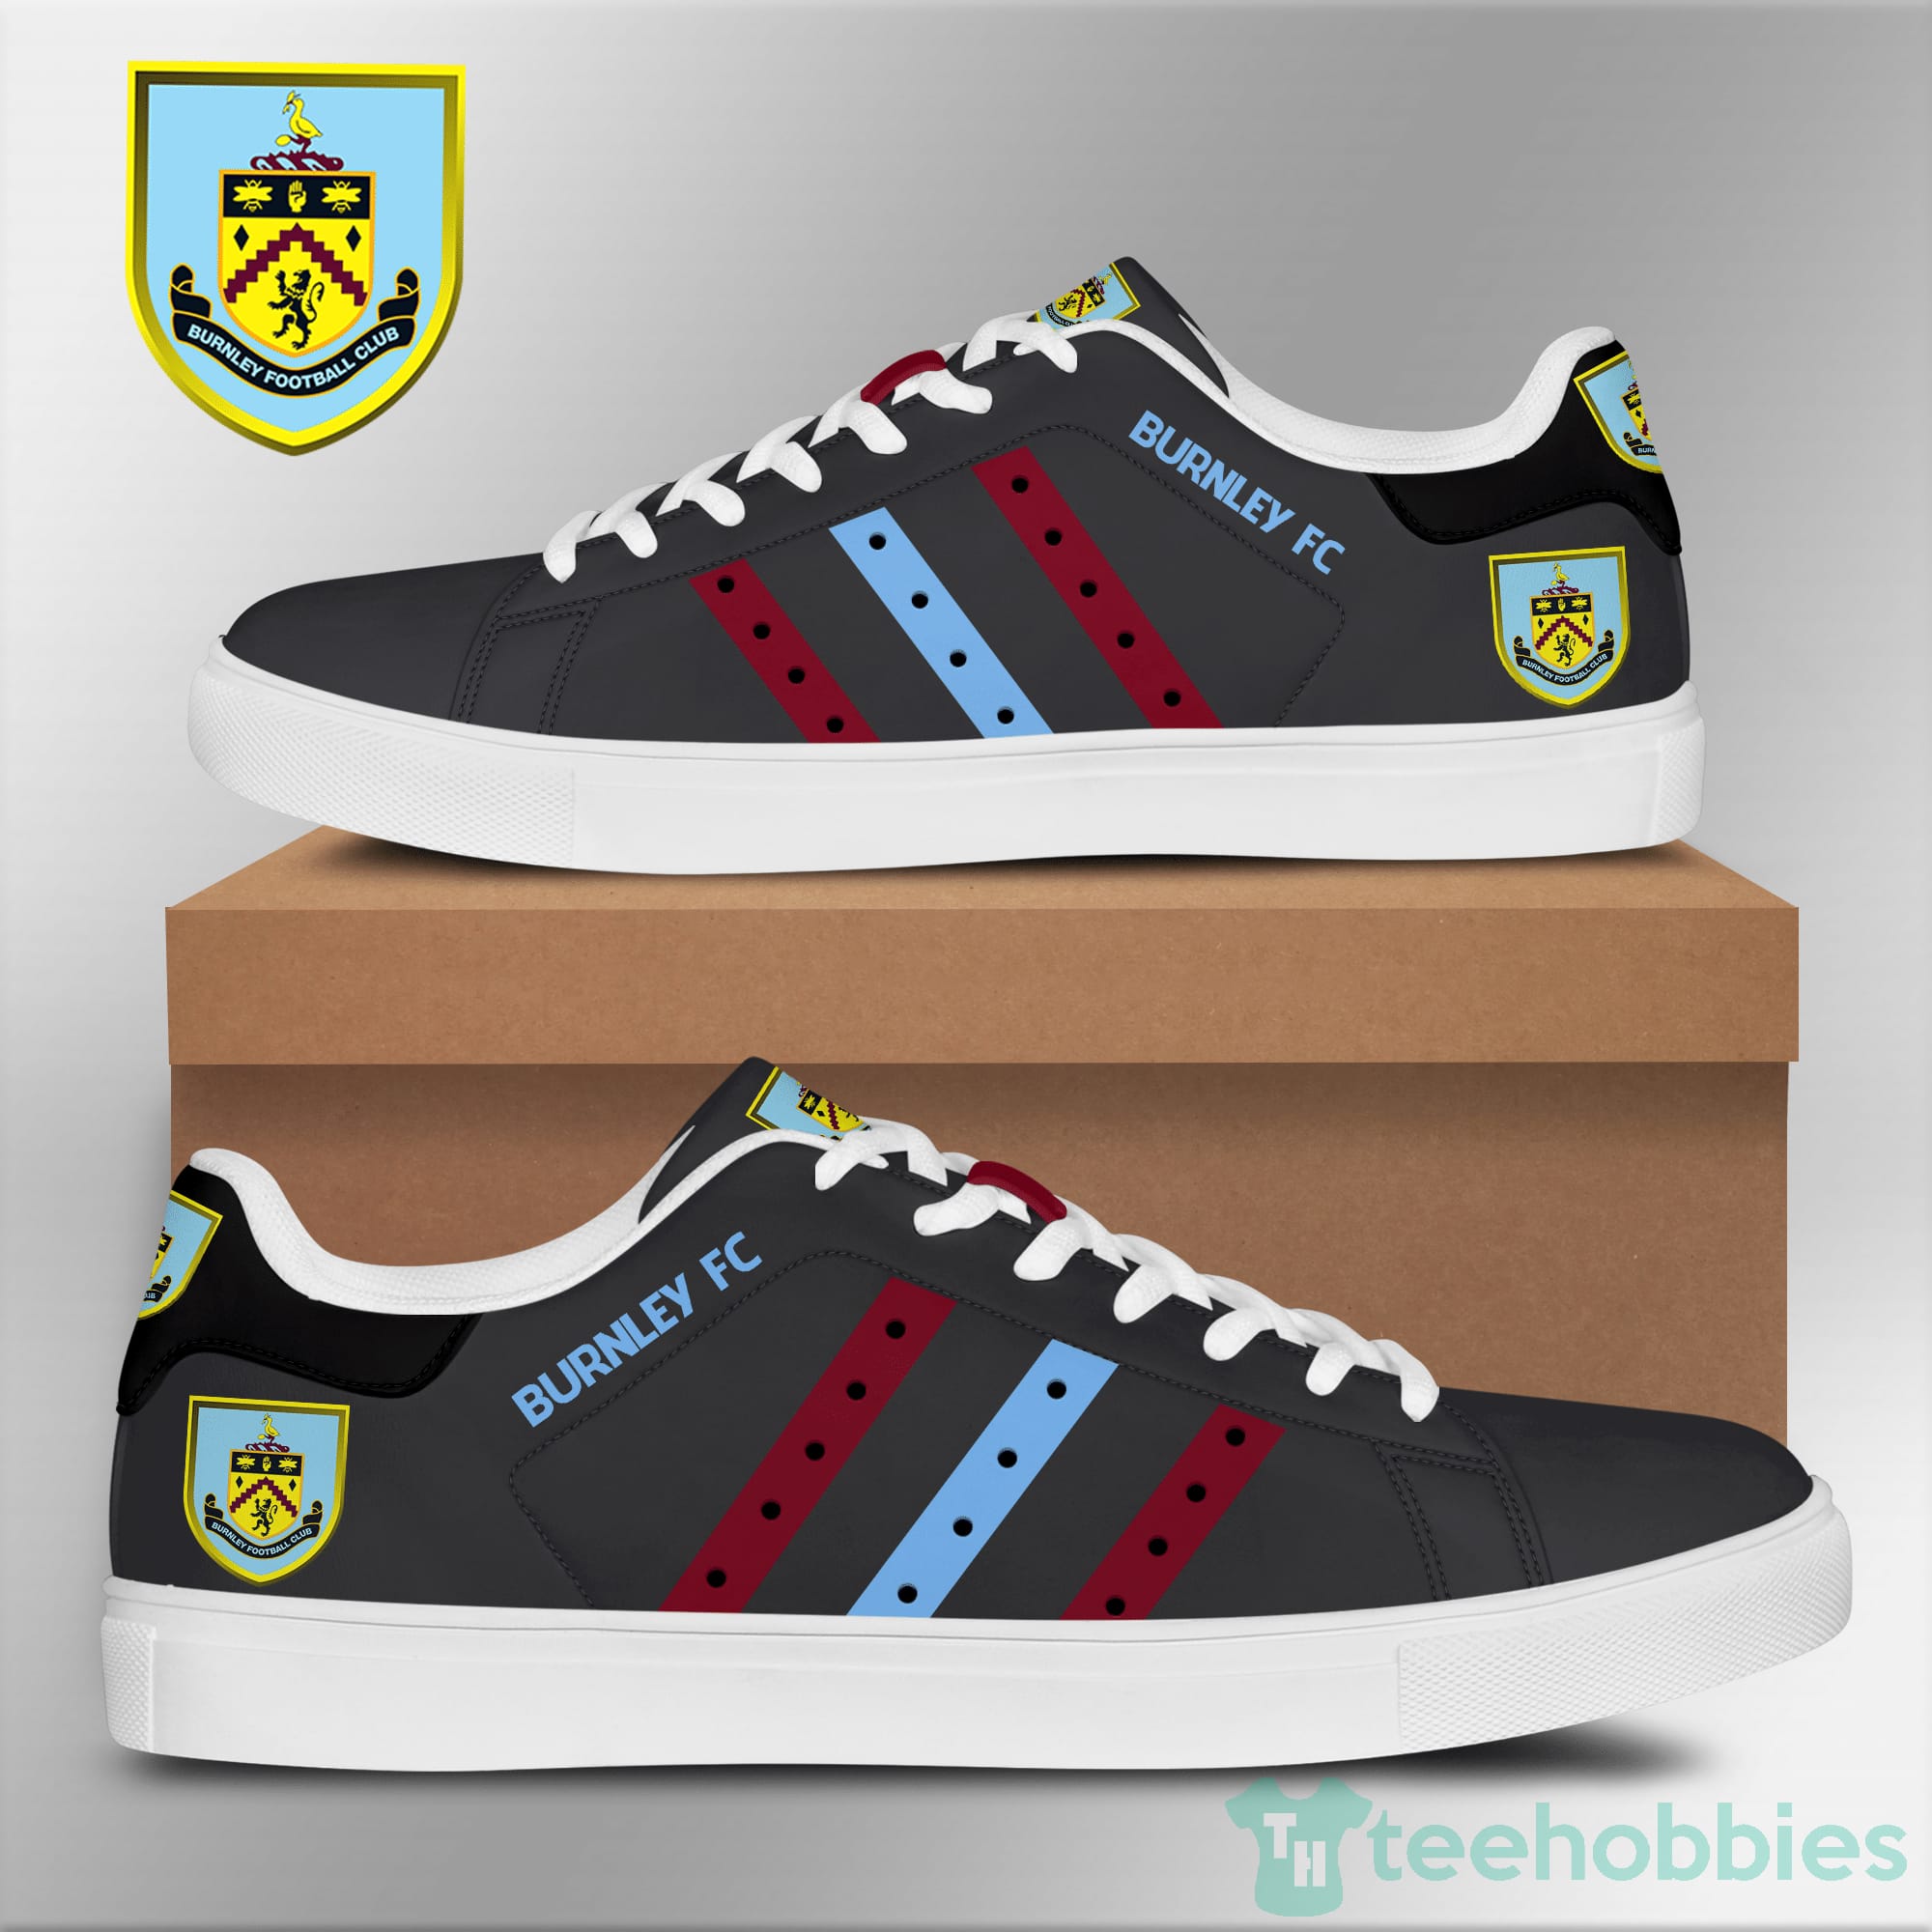 Burnley F.C Brown Low Top Skate Shoes Product photo 1